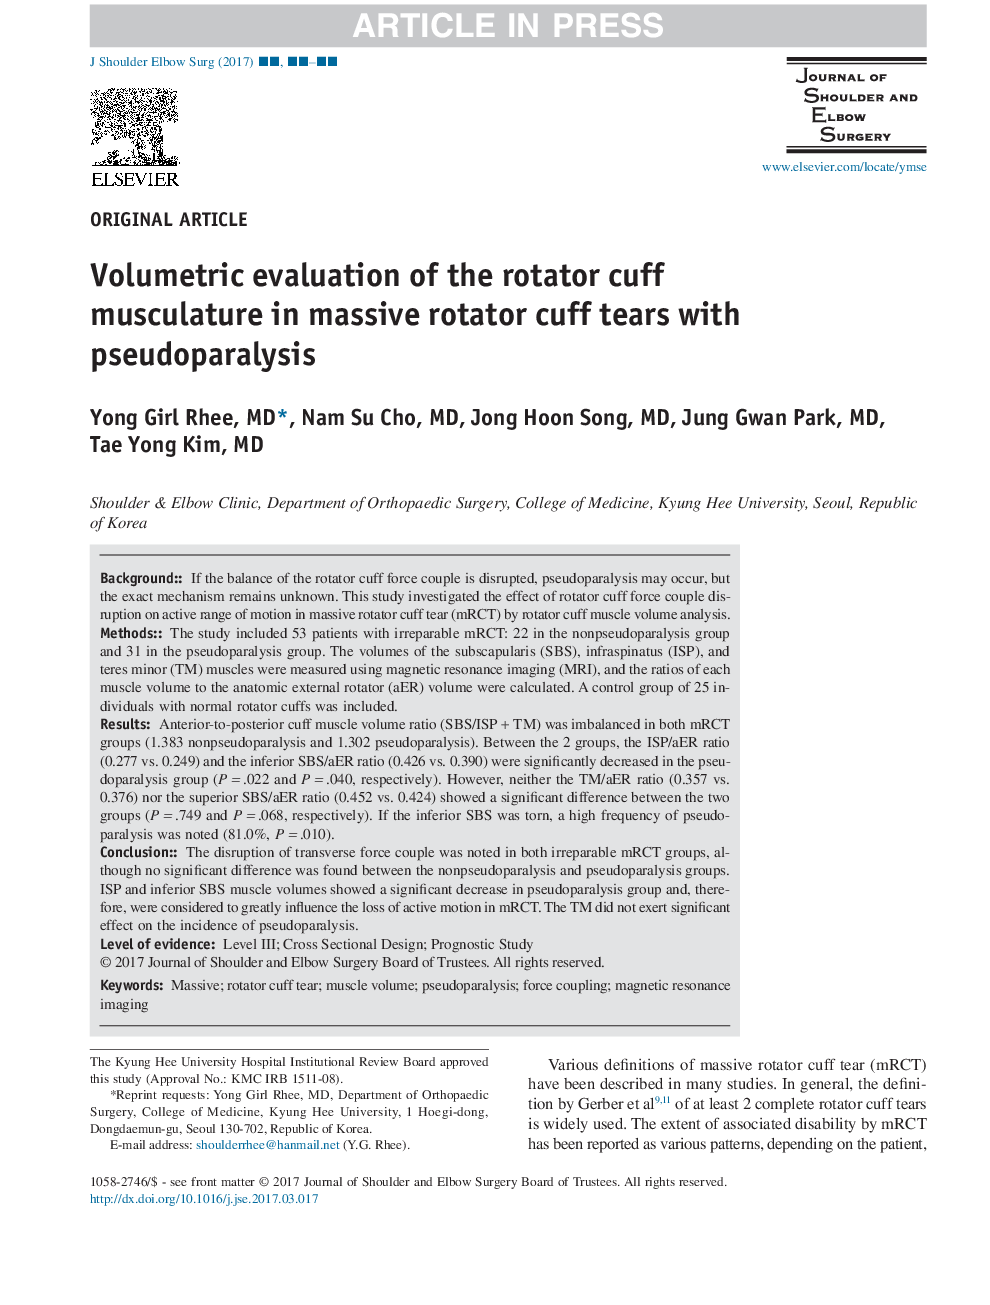 Volumetric evaluation of the rotator cuff musculature in massive rotator cuff tears with pseudoparalysis